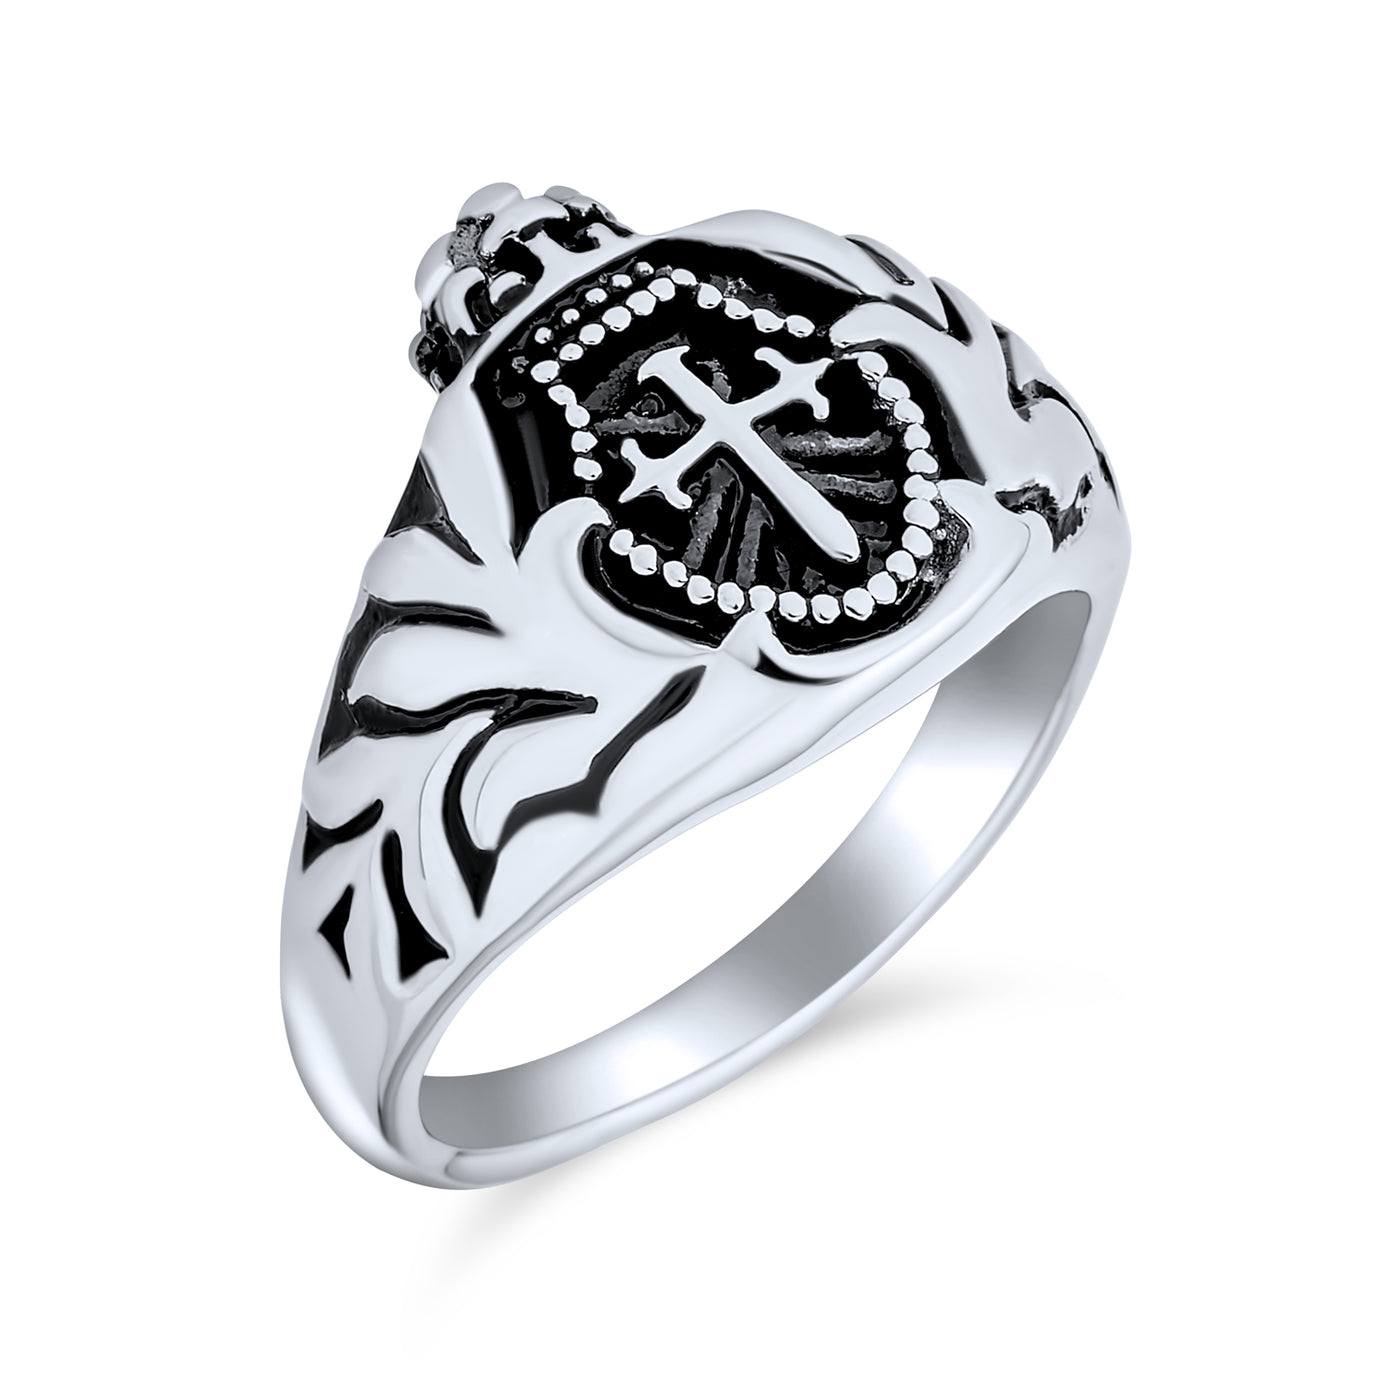 Mens Crown Knight Arms Shield Signet Cross Ring Black Stainless Steel